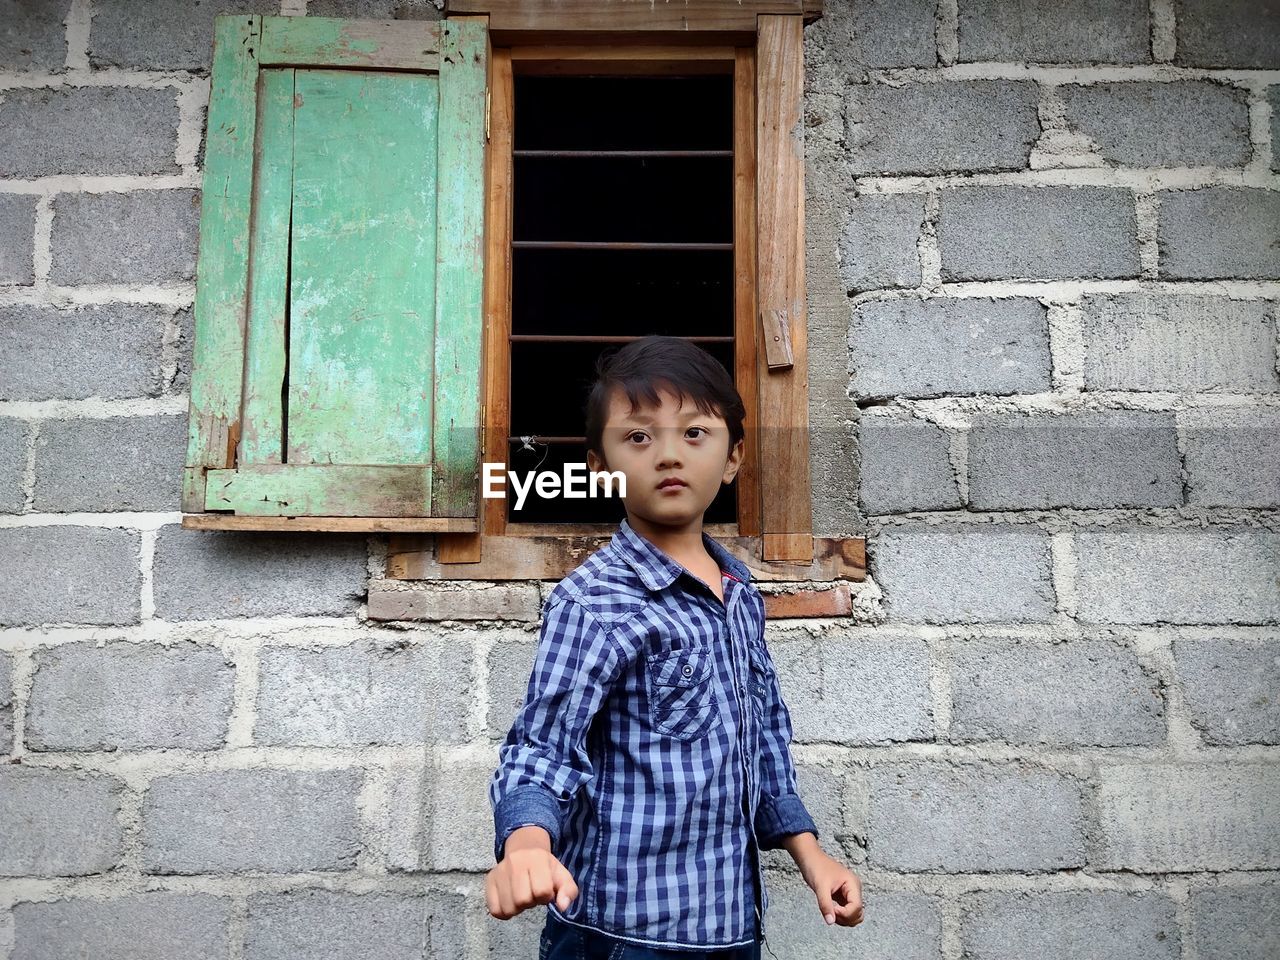 blue, one person, childhood, child, architecture, standing, portrait, men, casual clothing, building exterior, built structure, wall - building feature, looking at camera, window, person, building, lifestyles, shirt, front view, cute, emotion, clothing, looking, wall, innocence, day, outdoors, waist up, toddler, smiling, door, leisure activity, snapshot, female